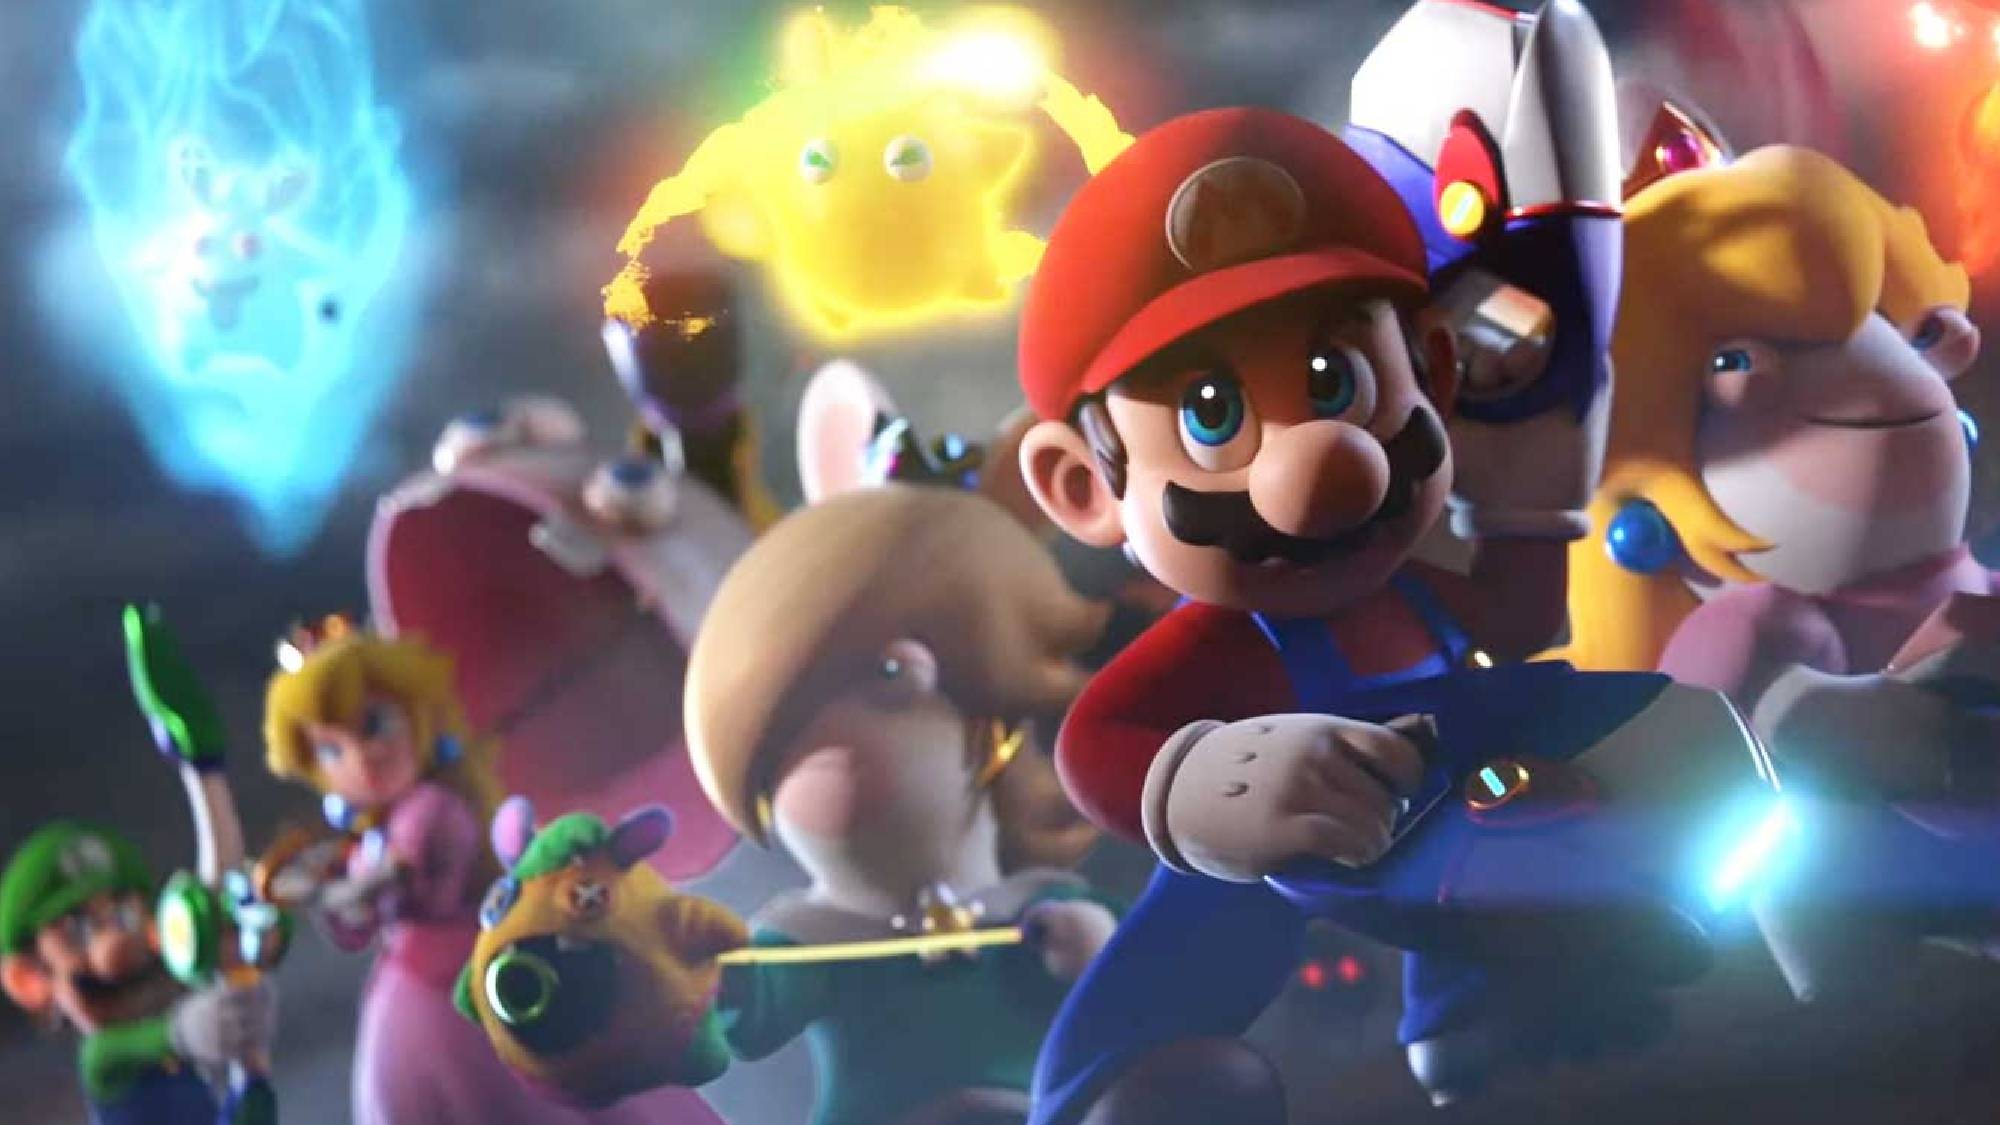 Mario + Rabbids sparks of hope